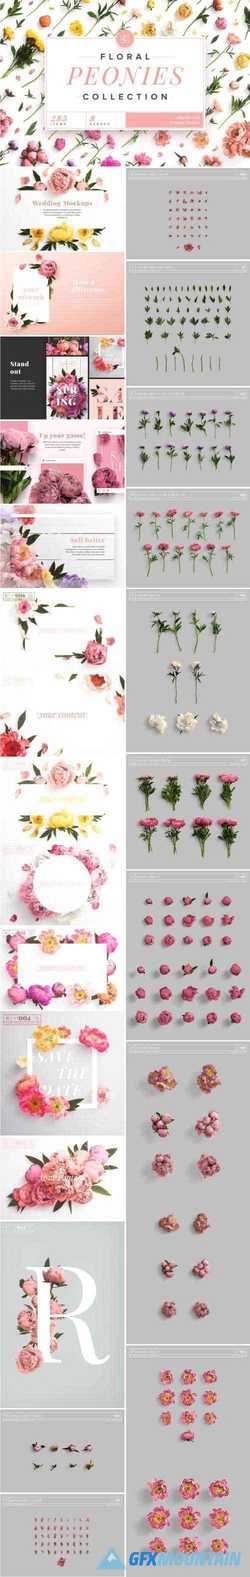 FLORAL PEONIES COLLECTION - 2303528